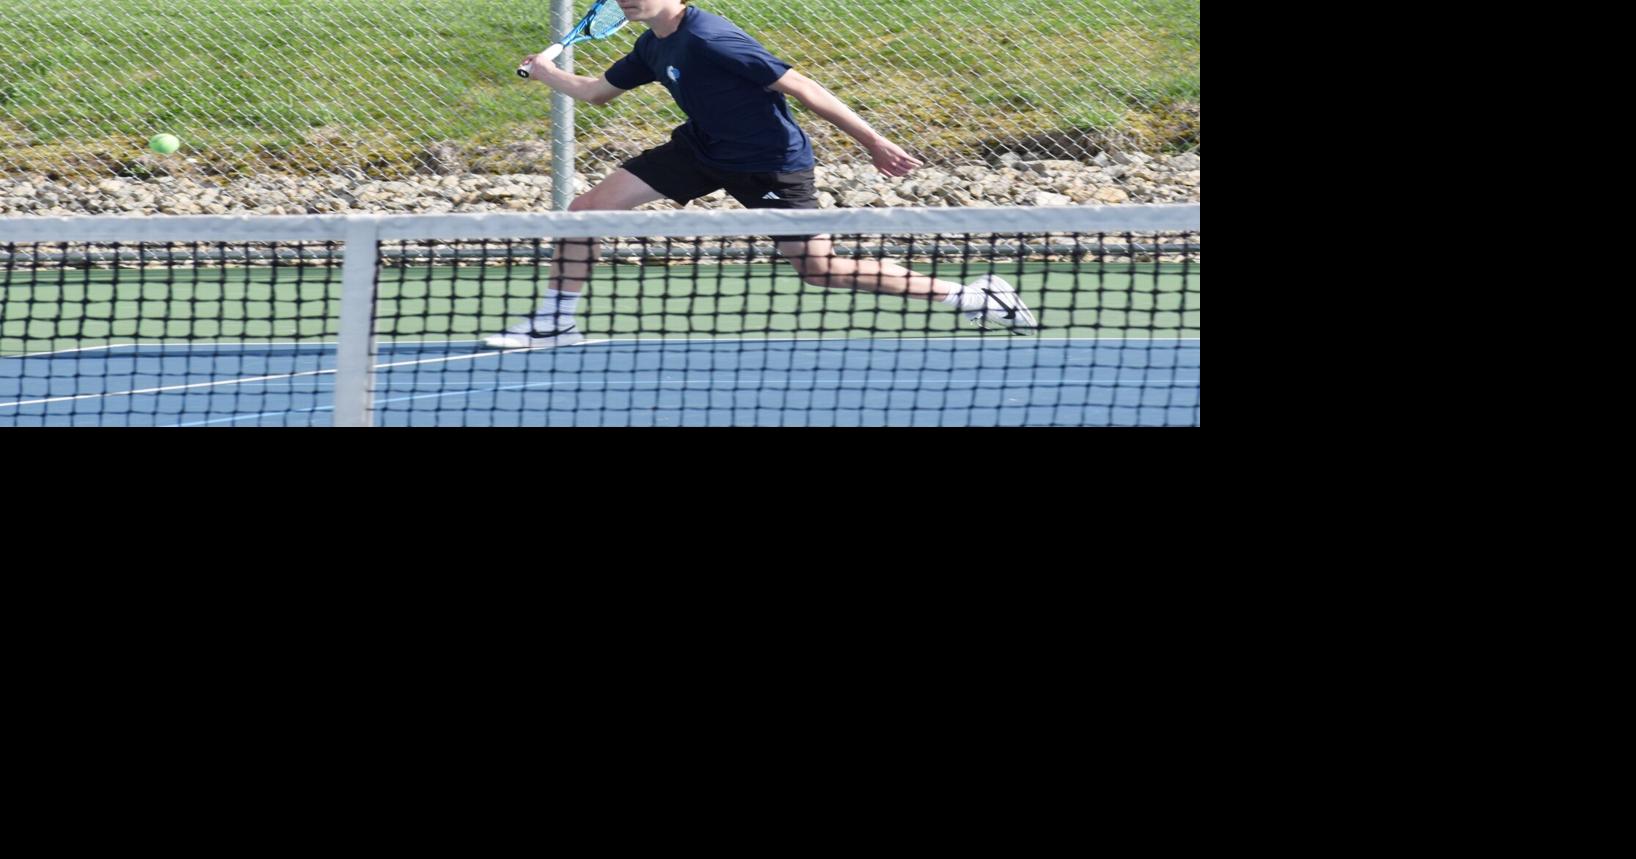 McFarland boys tennis scores conference win against Stoughton, loses matches to DeForest and Edgewood